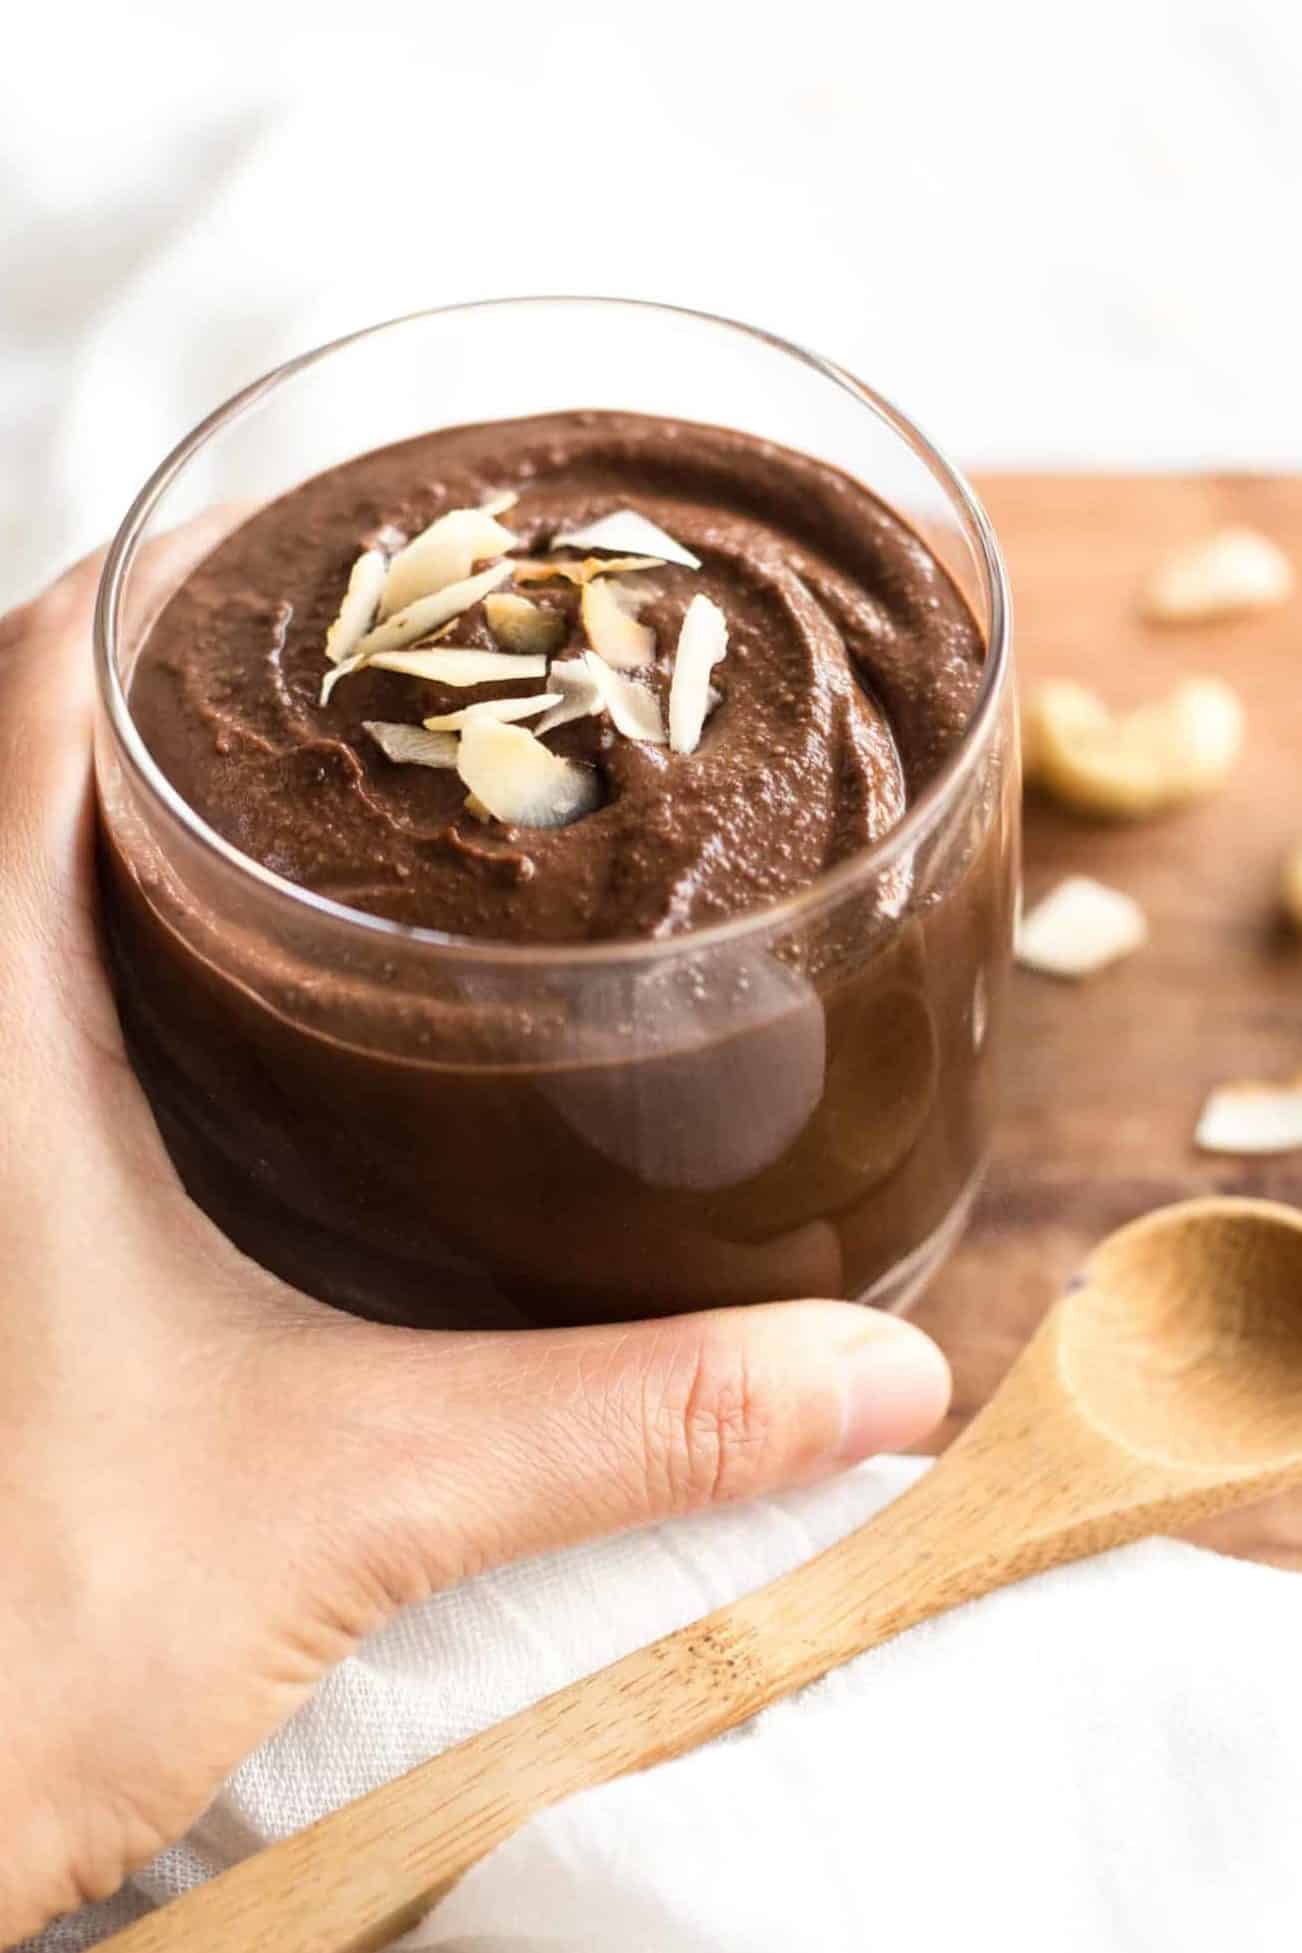 Hand holding a glass of vegan chocolate pudding